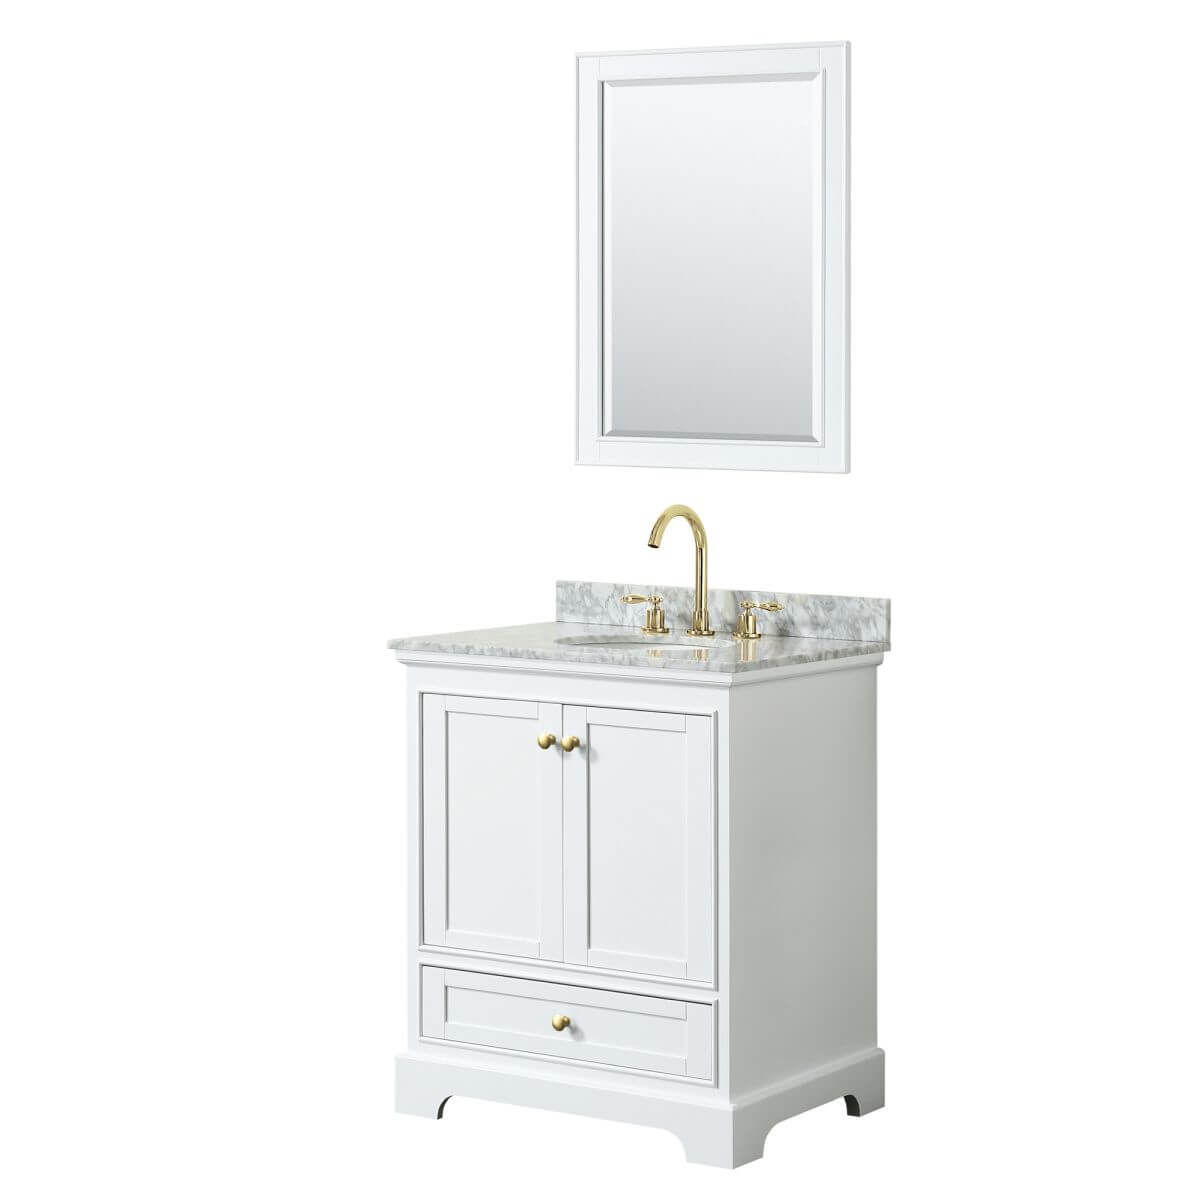 Wyndham Collection Deborah 30 inch Single Bathroom Vanity in White with White Carrara Marble Countertop, Undermount Oval Sink, Brushed Gold Trim and 24 inch Mirror - WCS202030SWGCMUNOM24